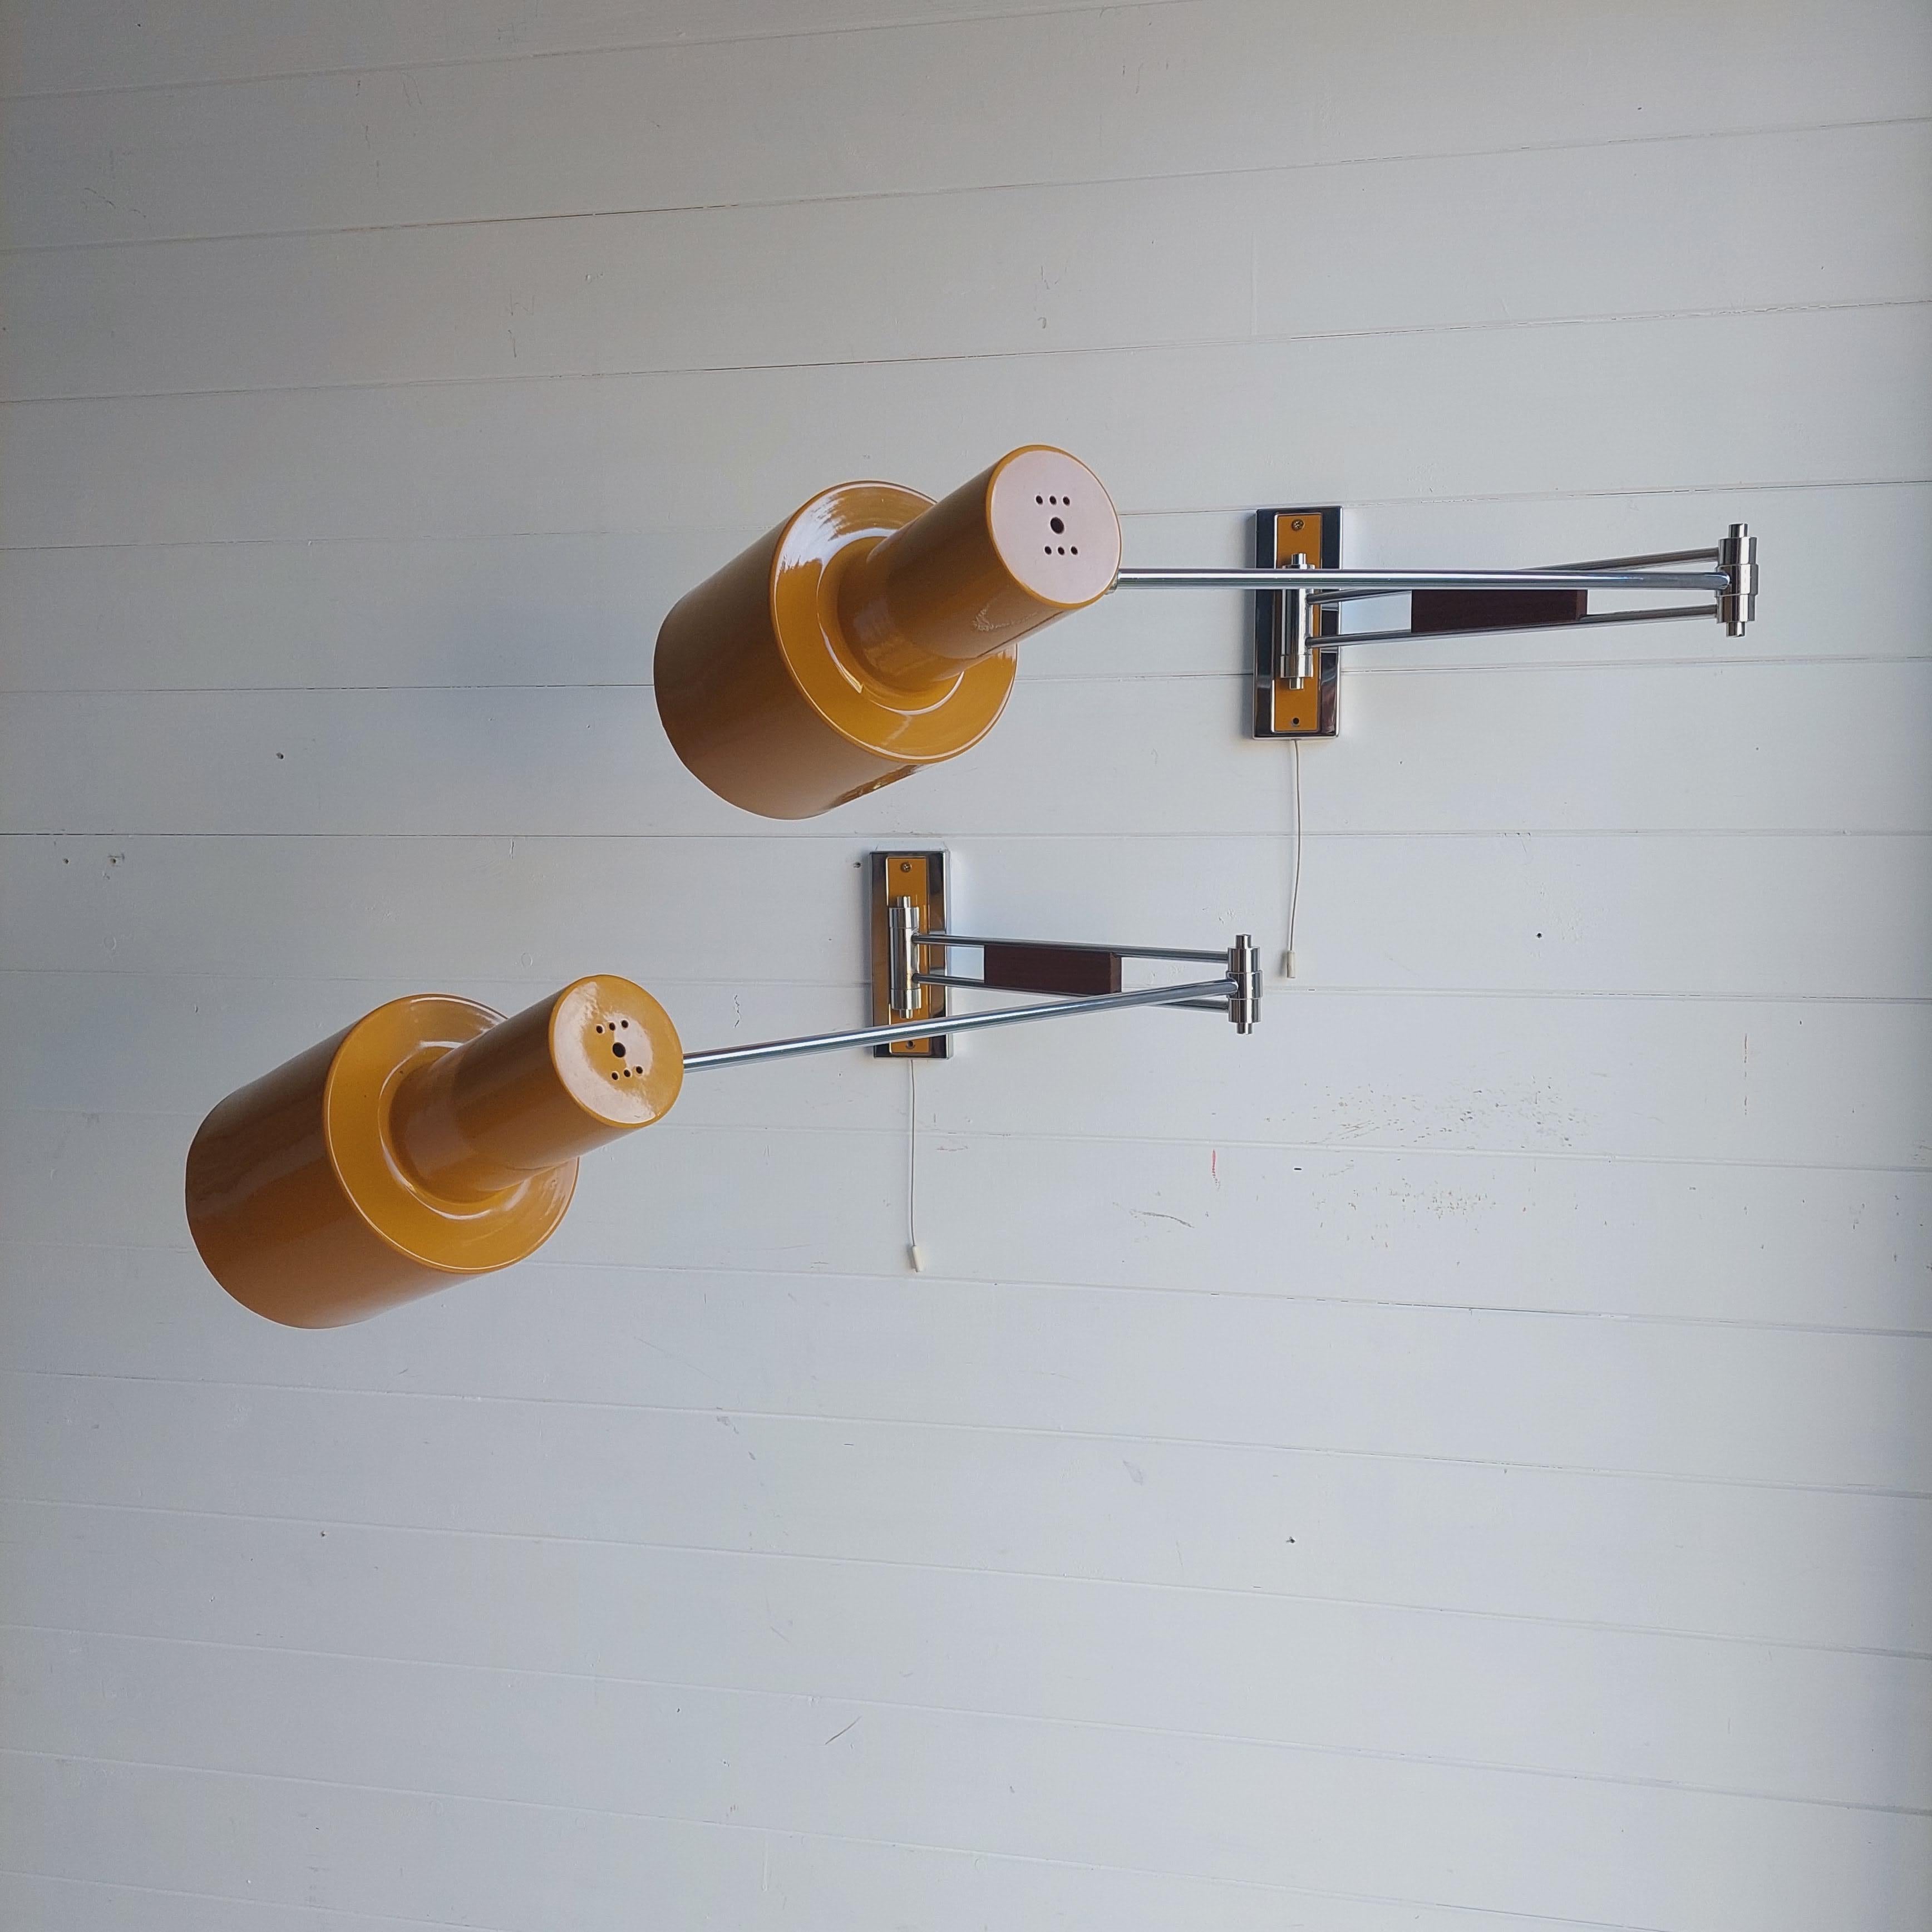 Mid Century Modern wall lamp, Set of 2
A rare swing arm wall sconces  in its original mustard color.
Probably designed by Jo Hammerborg and manufactured by Fog & Mørup in Denmark from 1969-75, although we haven't found any other model exactly as